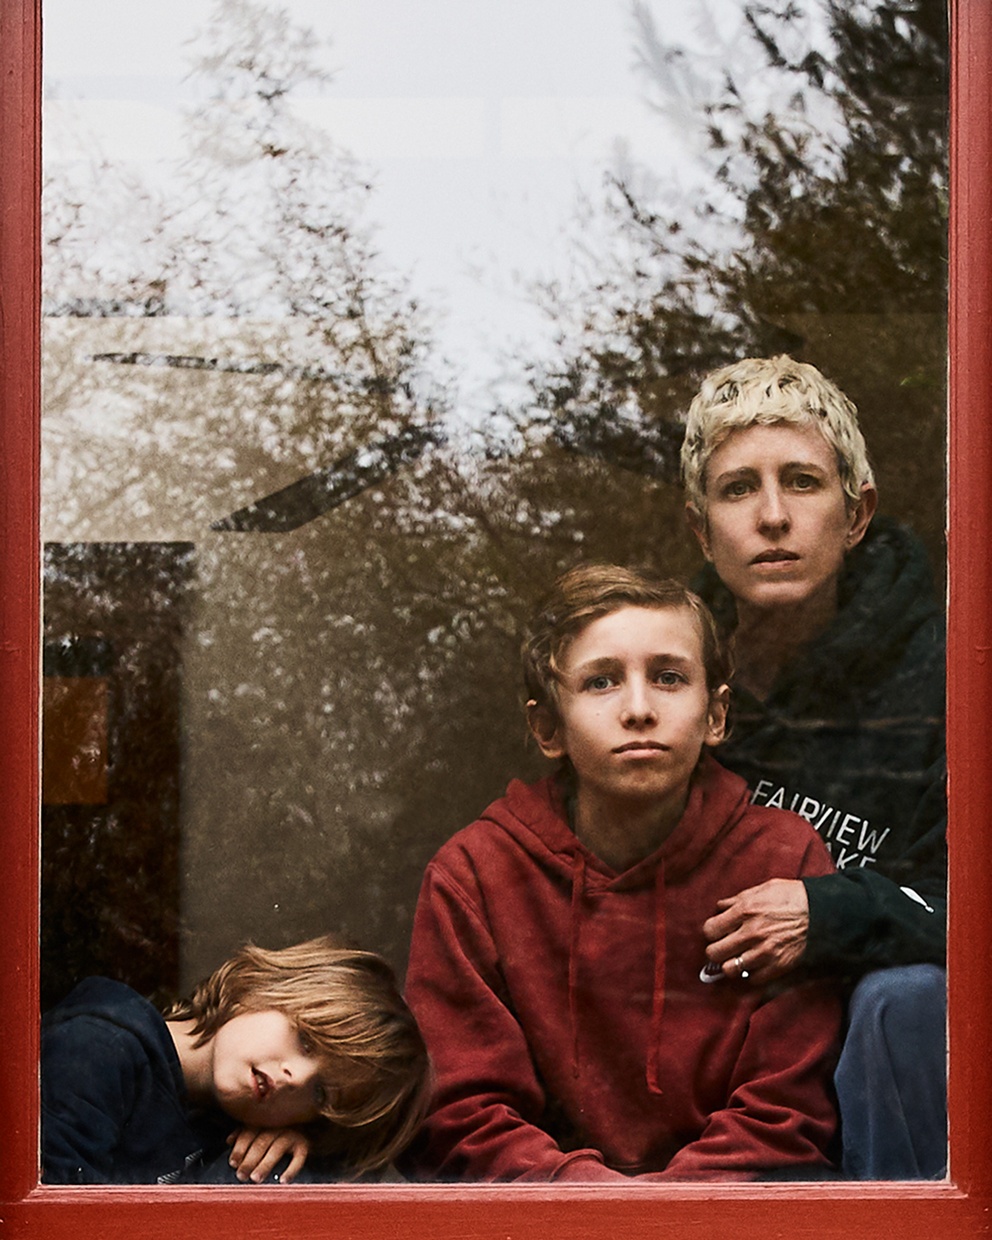 A photograph of a red framed window. A light-skinned mother and two light-skinned children look out at the viewer from behind the window pane.